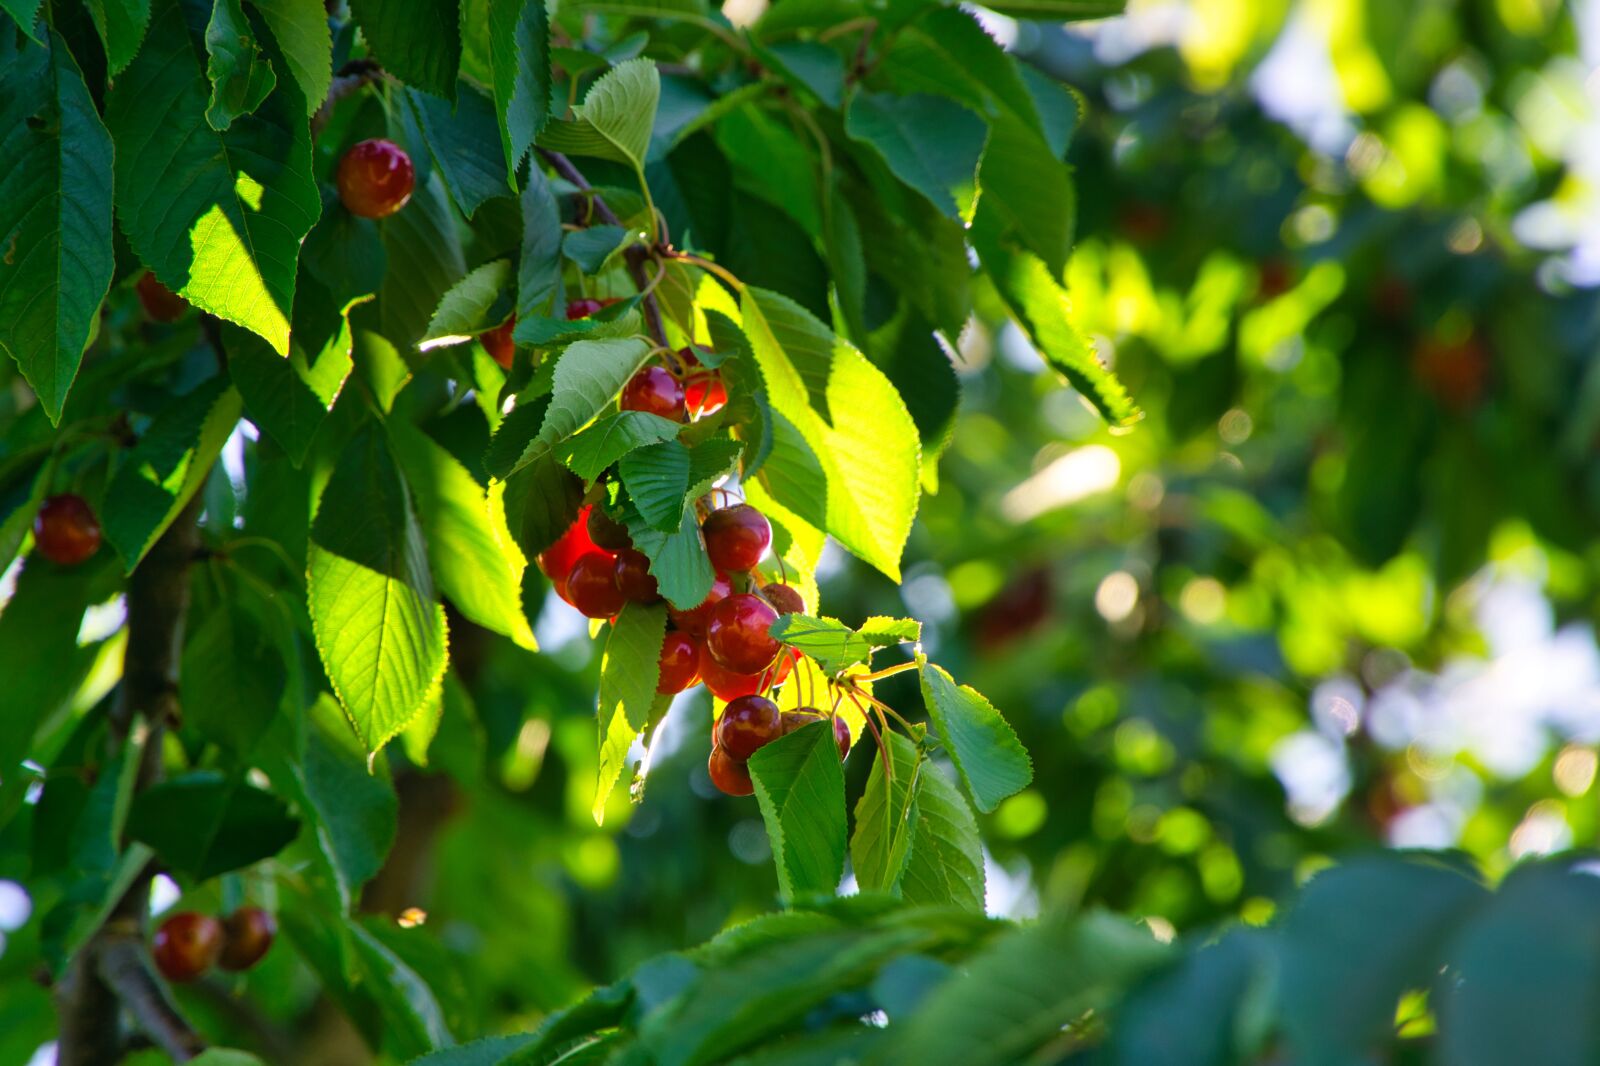 Sony a6000 + Sony E PZ 18-105mm F4 G OSS sample photo. Cherries, fruit tree, nature photography